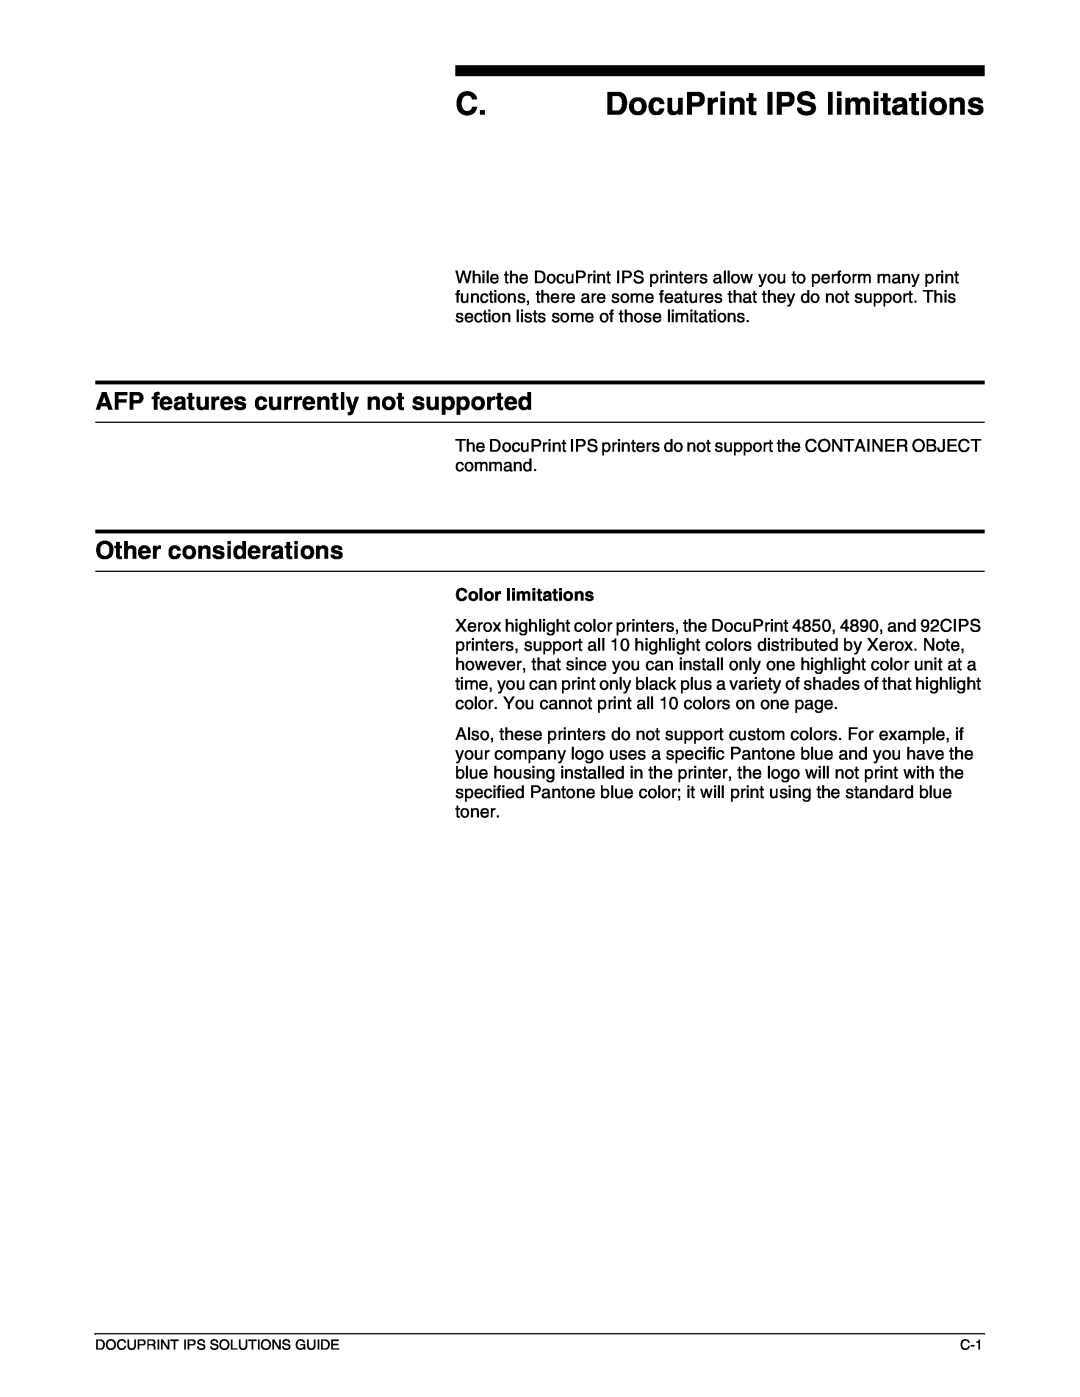 Xerox 721P88200 manual C. DocuPrint IPS limitations, AFP features currently not supported, Other considerations 